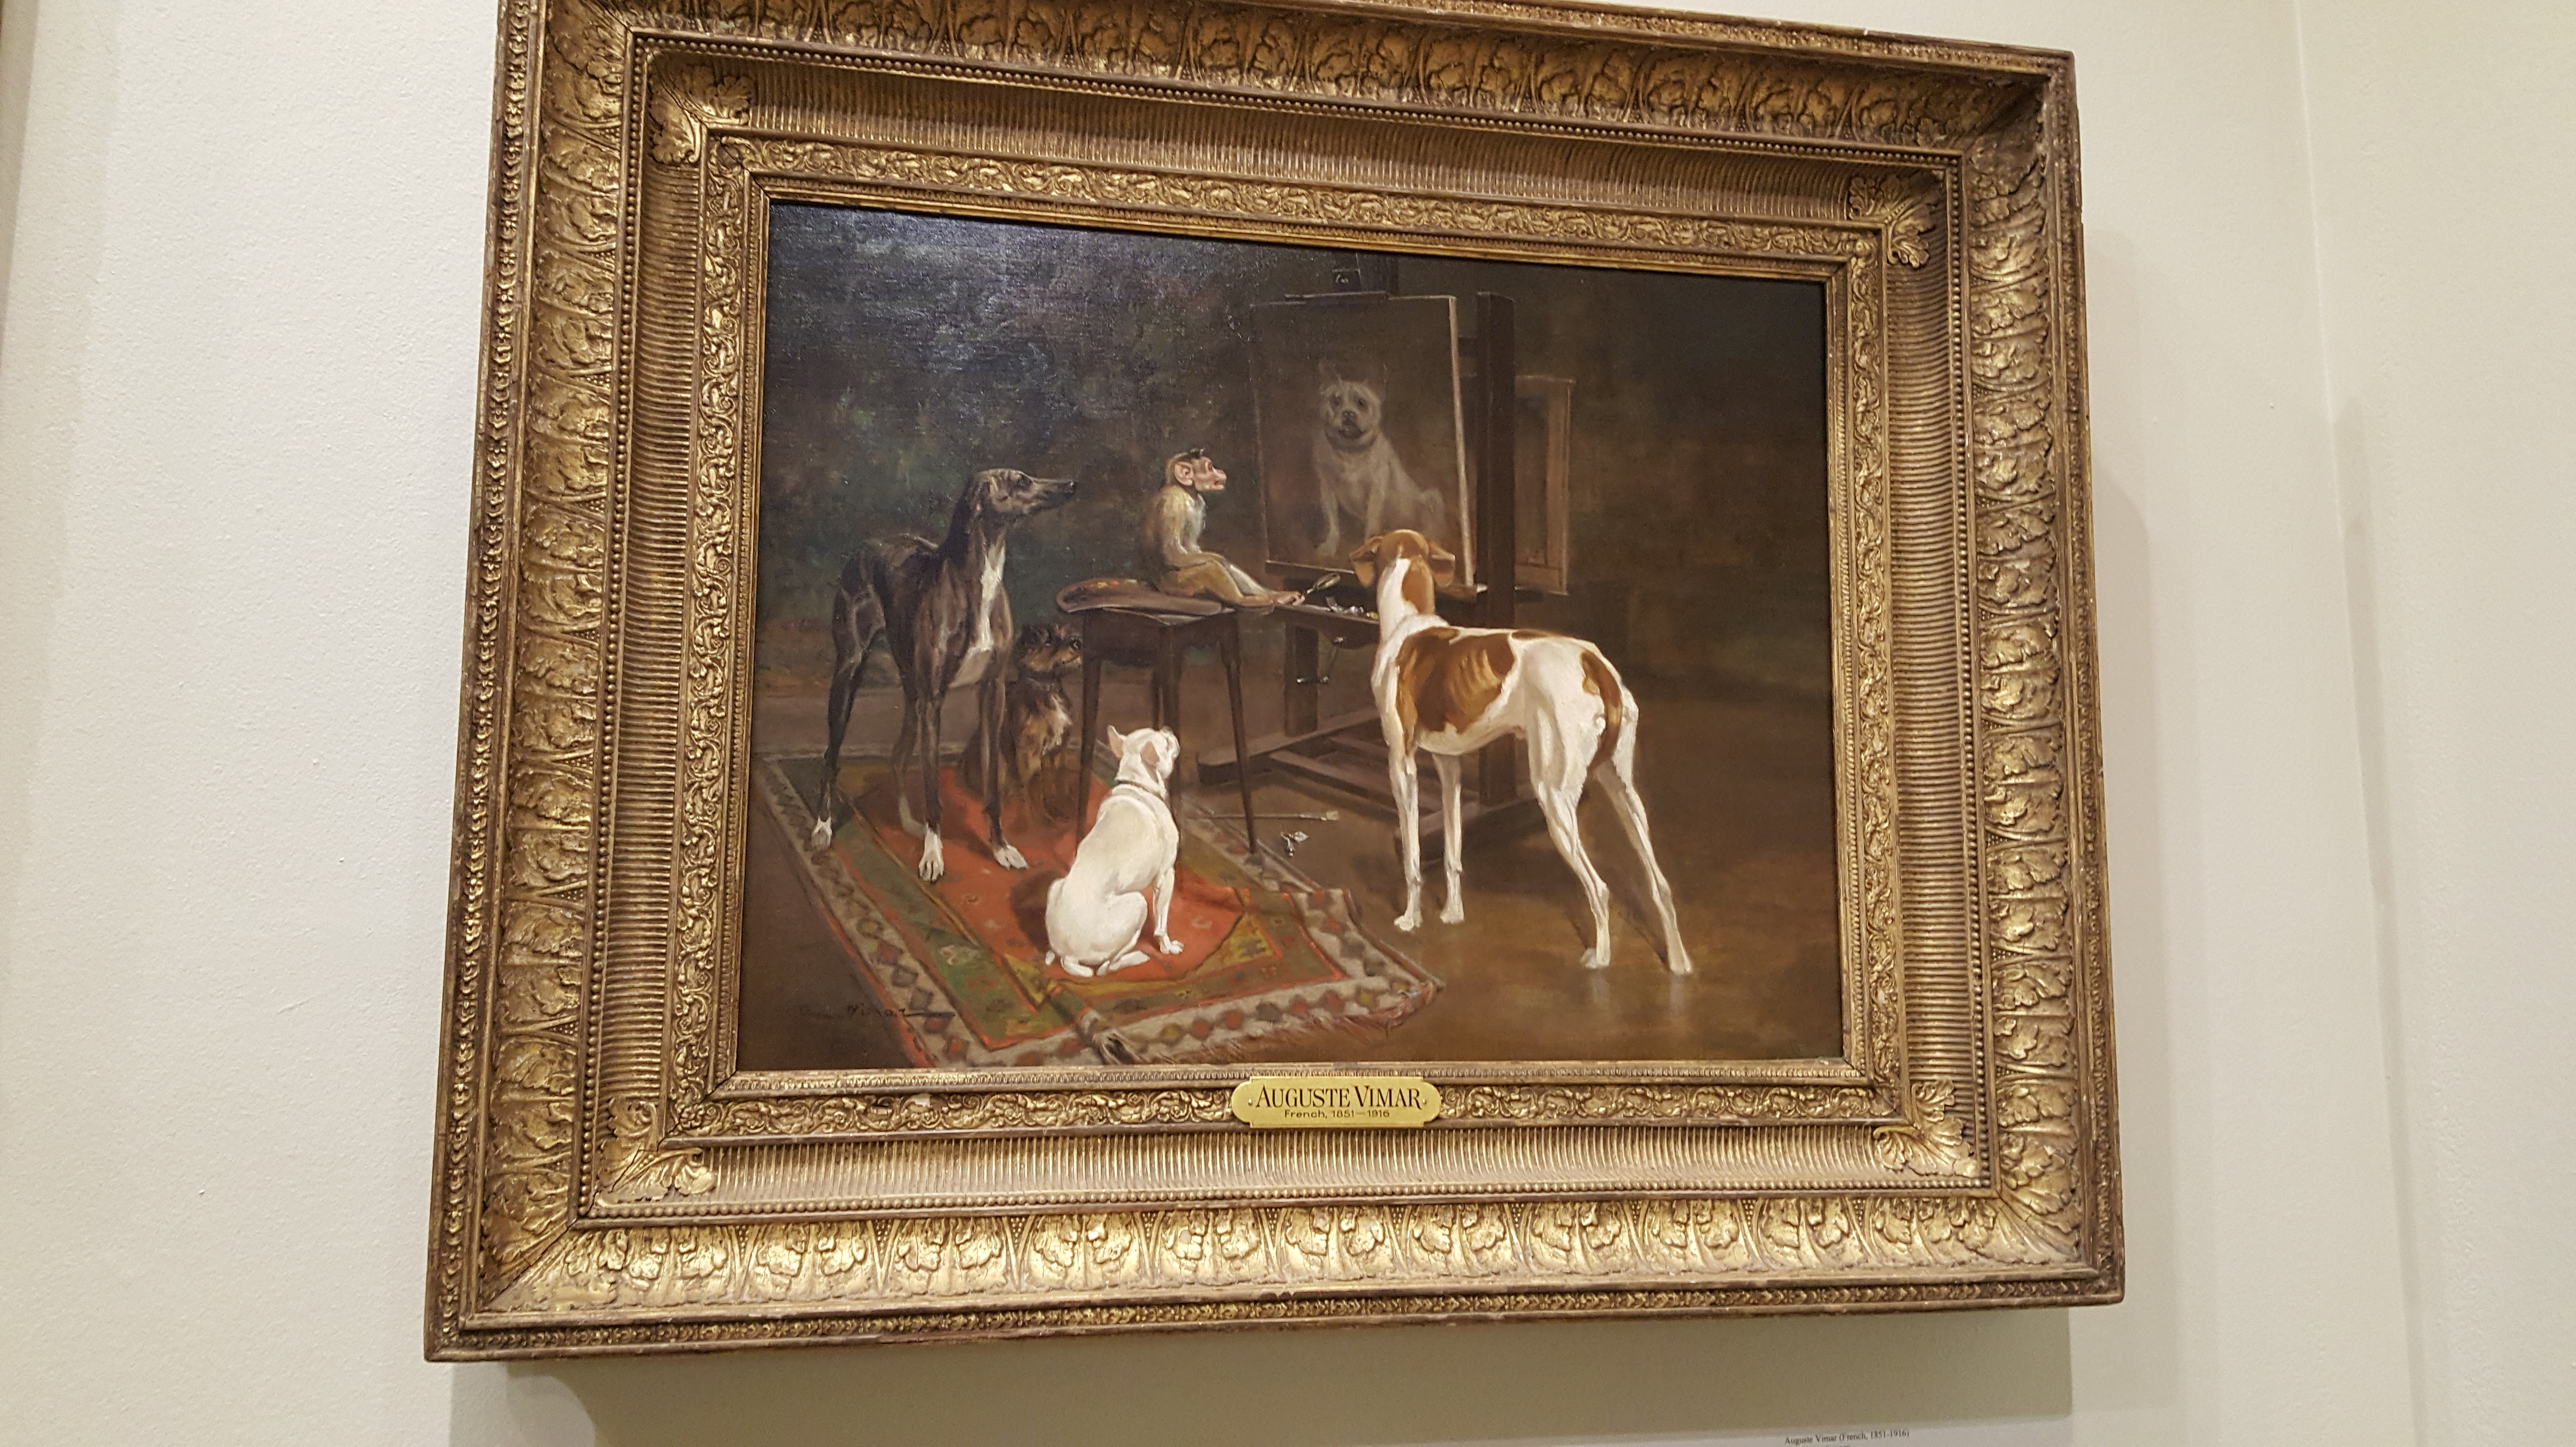 Dogs Invade Plant Hall in 19th Century Art